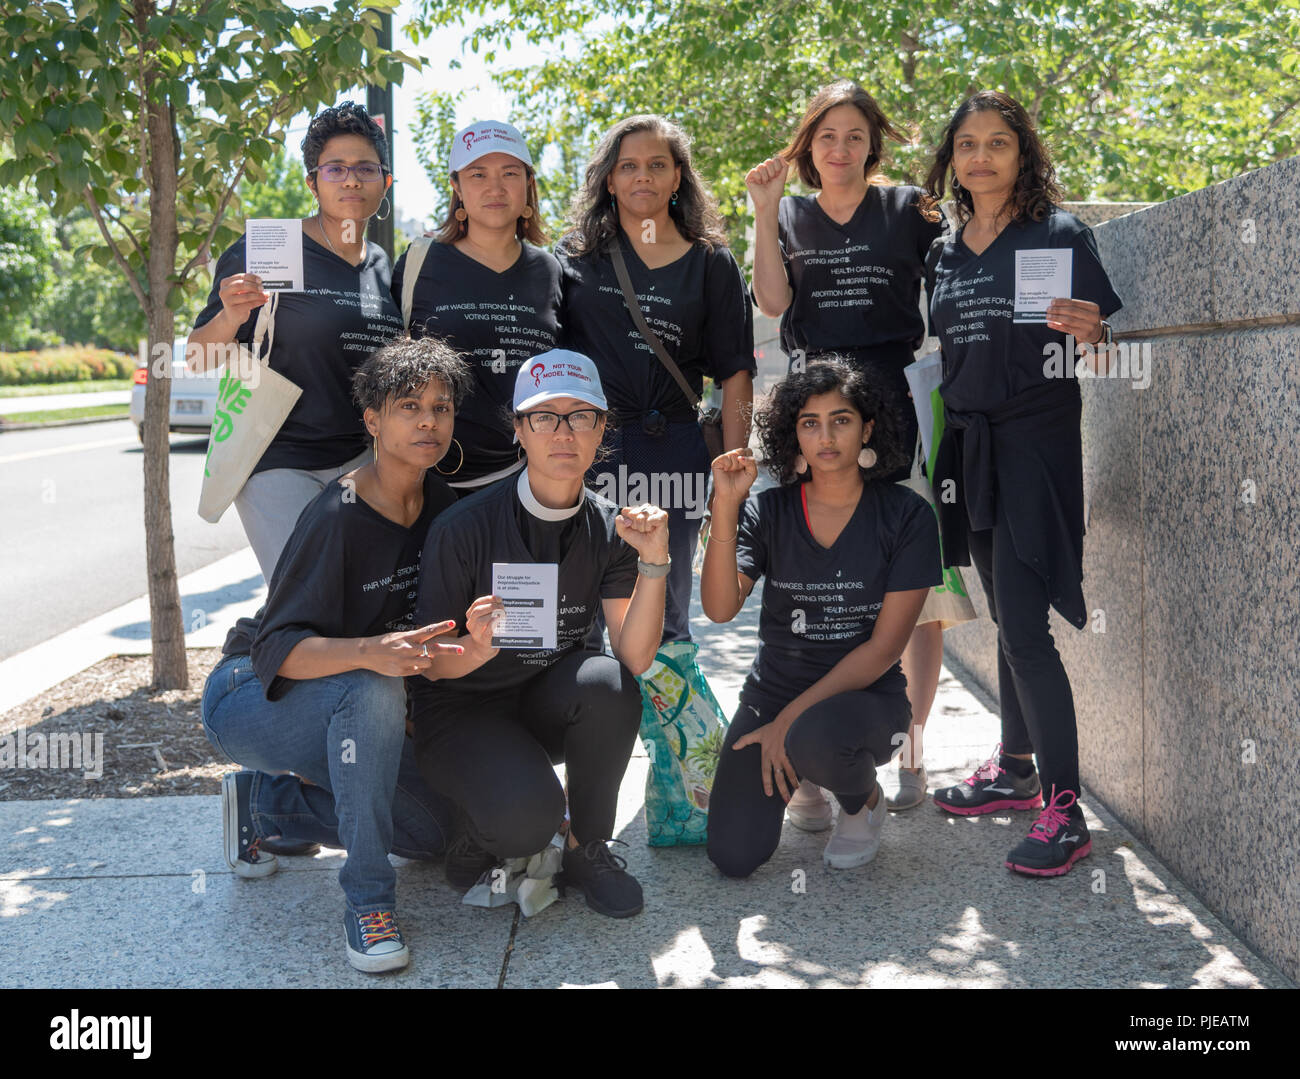 Washington DC / August 23, 2018: Women's rights group protests the nomination of Kavanaugh to be Supreme Court Justice Stock Photo